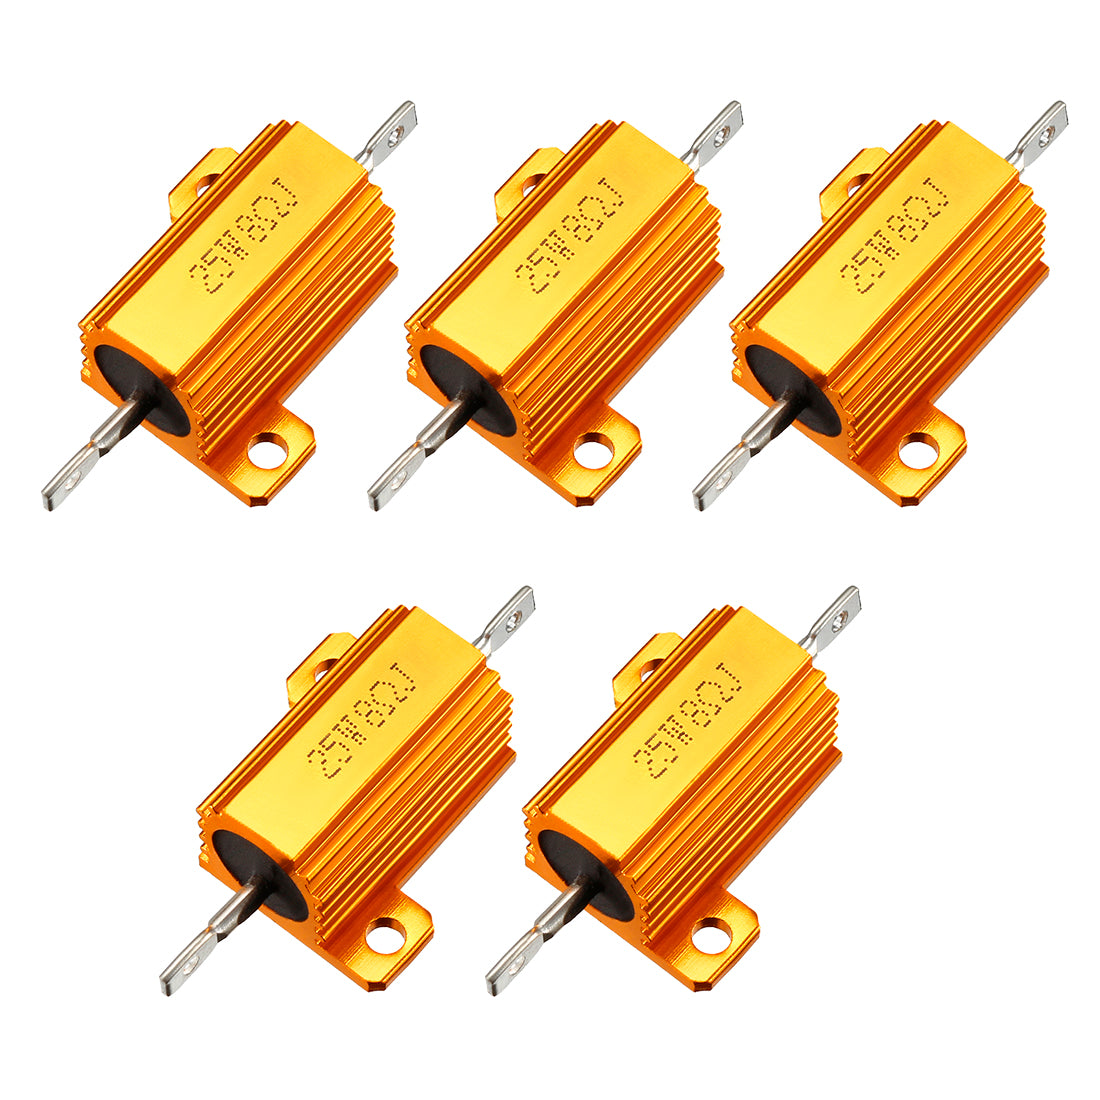 uxcell Uxcell 25W 8 Ohm 5% Aluminum Housing Resistor Screw  Chassis Mounted Aluminum Case Wirewound Resistor Load Resistors Gold Tone 5 Pcs